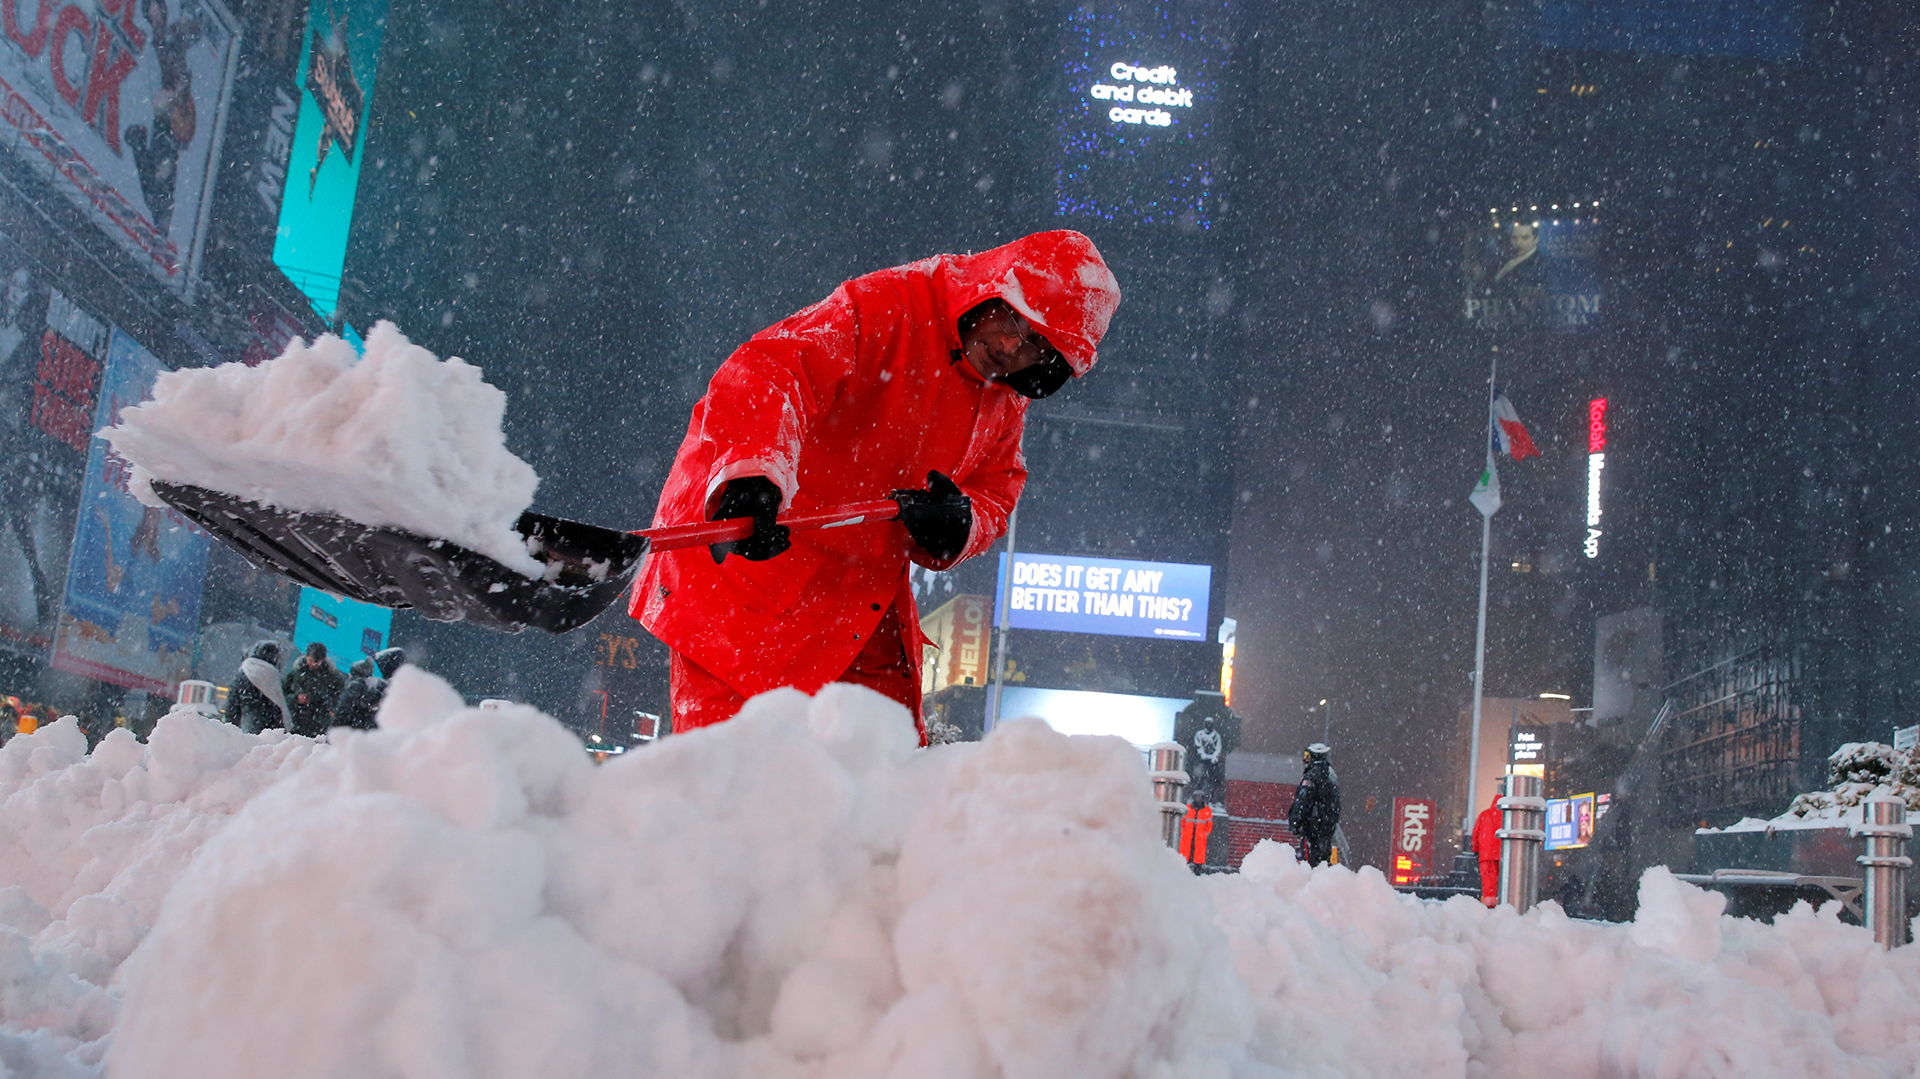 A worker clears snow in Times Square as snow falls in Manhattan, New York, U.S., March 14, 2017. REUTERS/Andrew Kelly